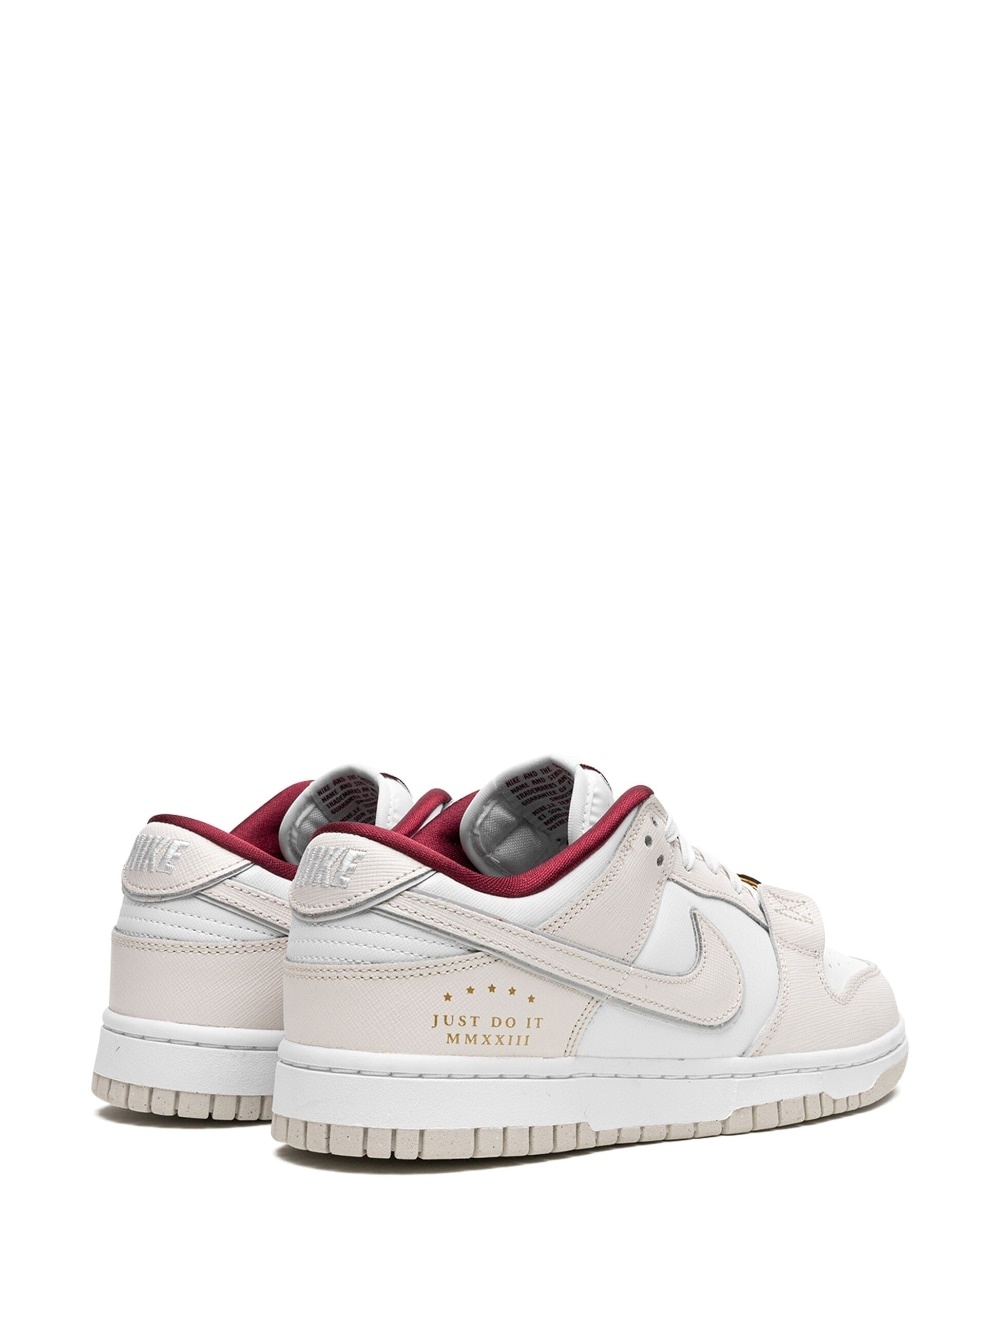 Dunk Low "Just Do It" sneakers - 3